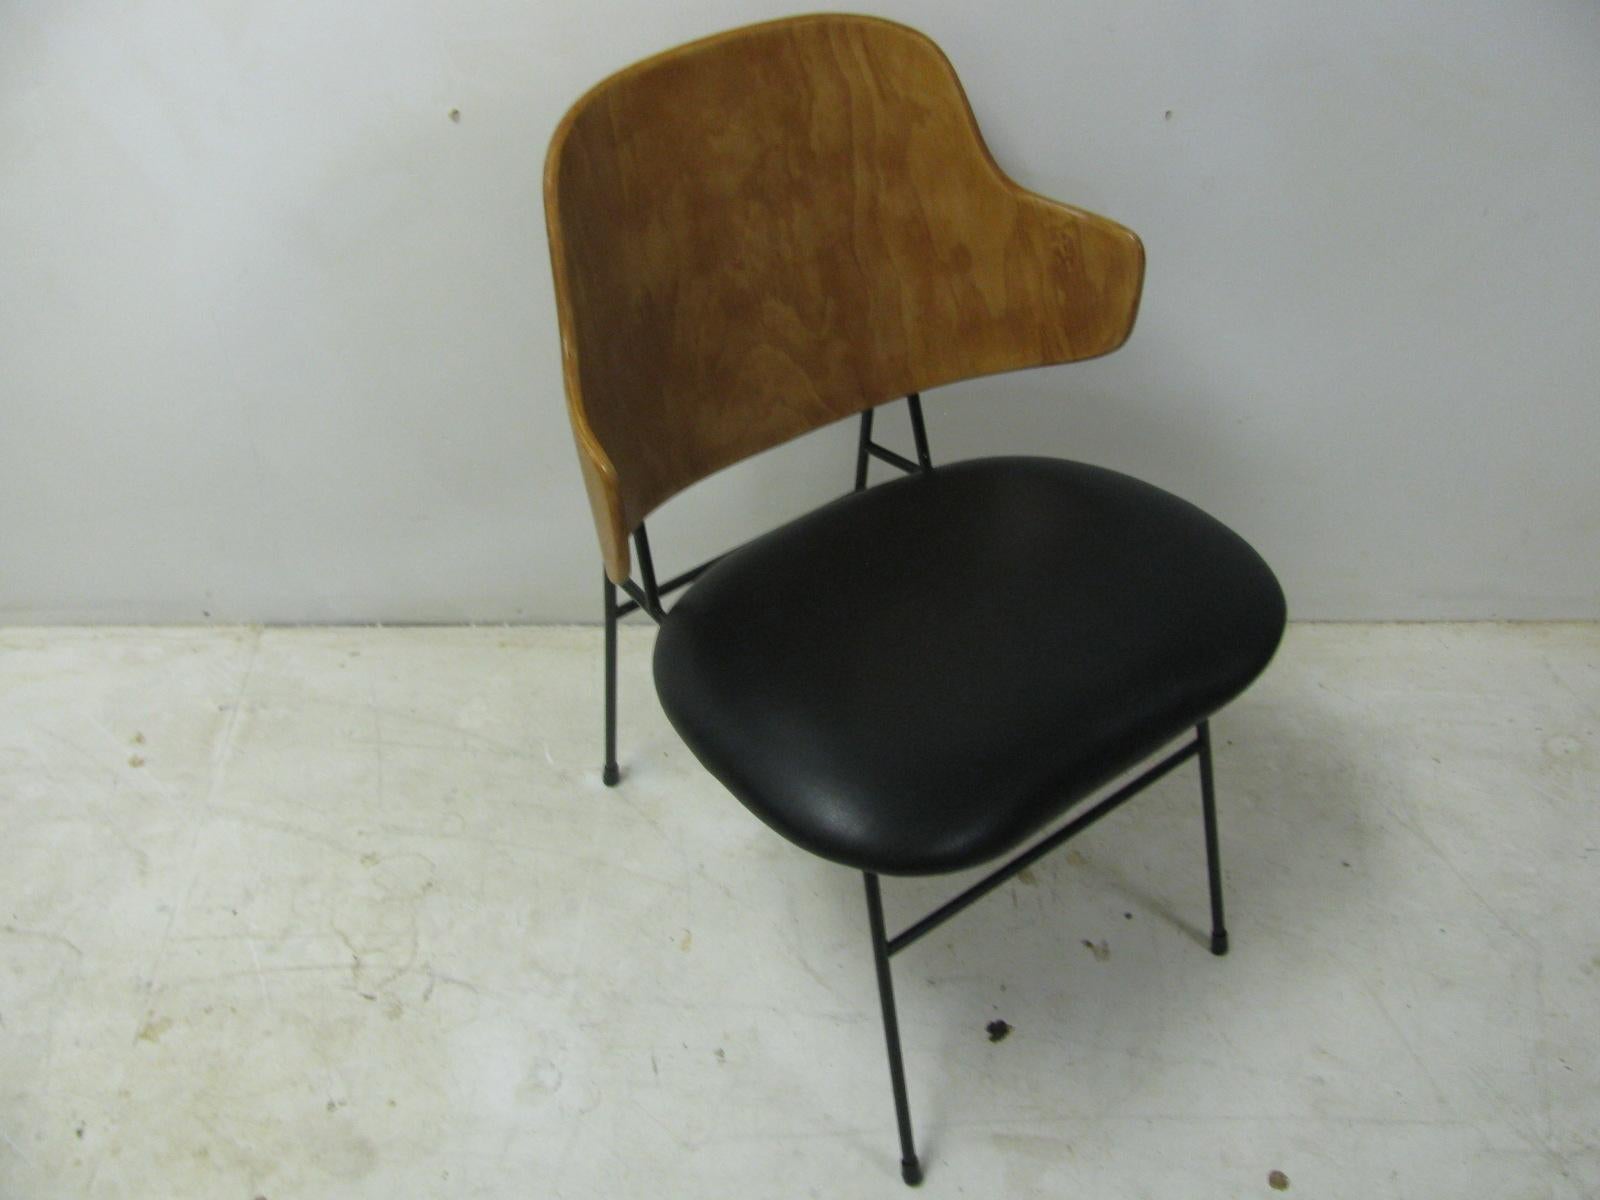 Restored vintage dining-desk chair by Ib Kofod-Larsen stamped made in Denmark. Birch back with repainted iron frame and new plastic feet. New black leather over new padding on seat.